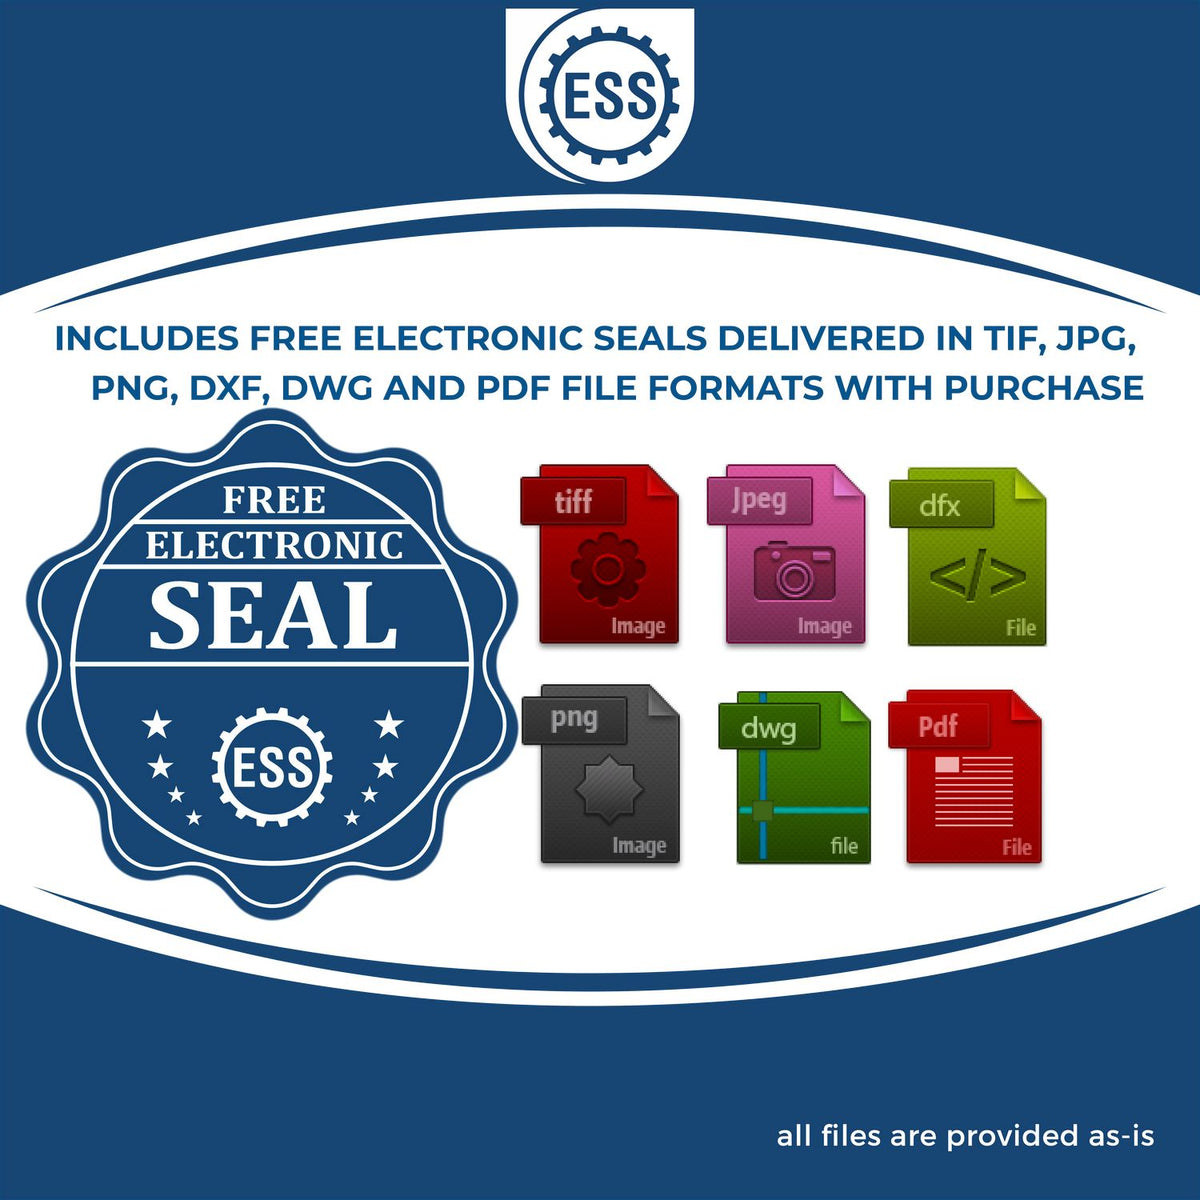 An infographic for the free electronic seal for the Hybrid Massachusetts Land Surveyor Seal illustrating the different file type icons such as DXF, DWG, TIF, JPG and PNG.